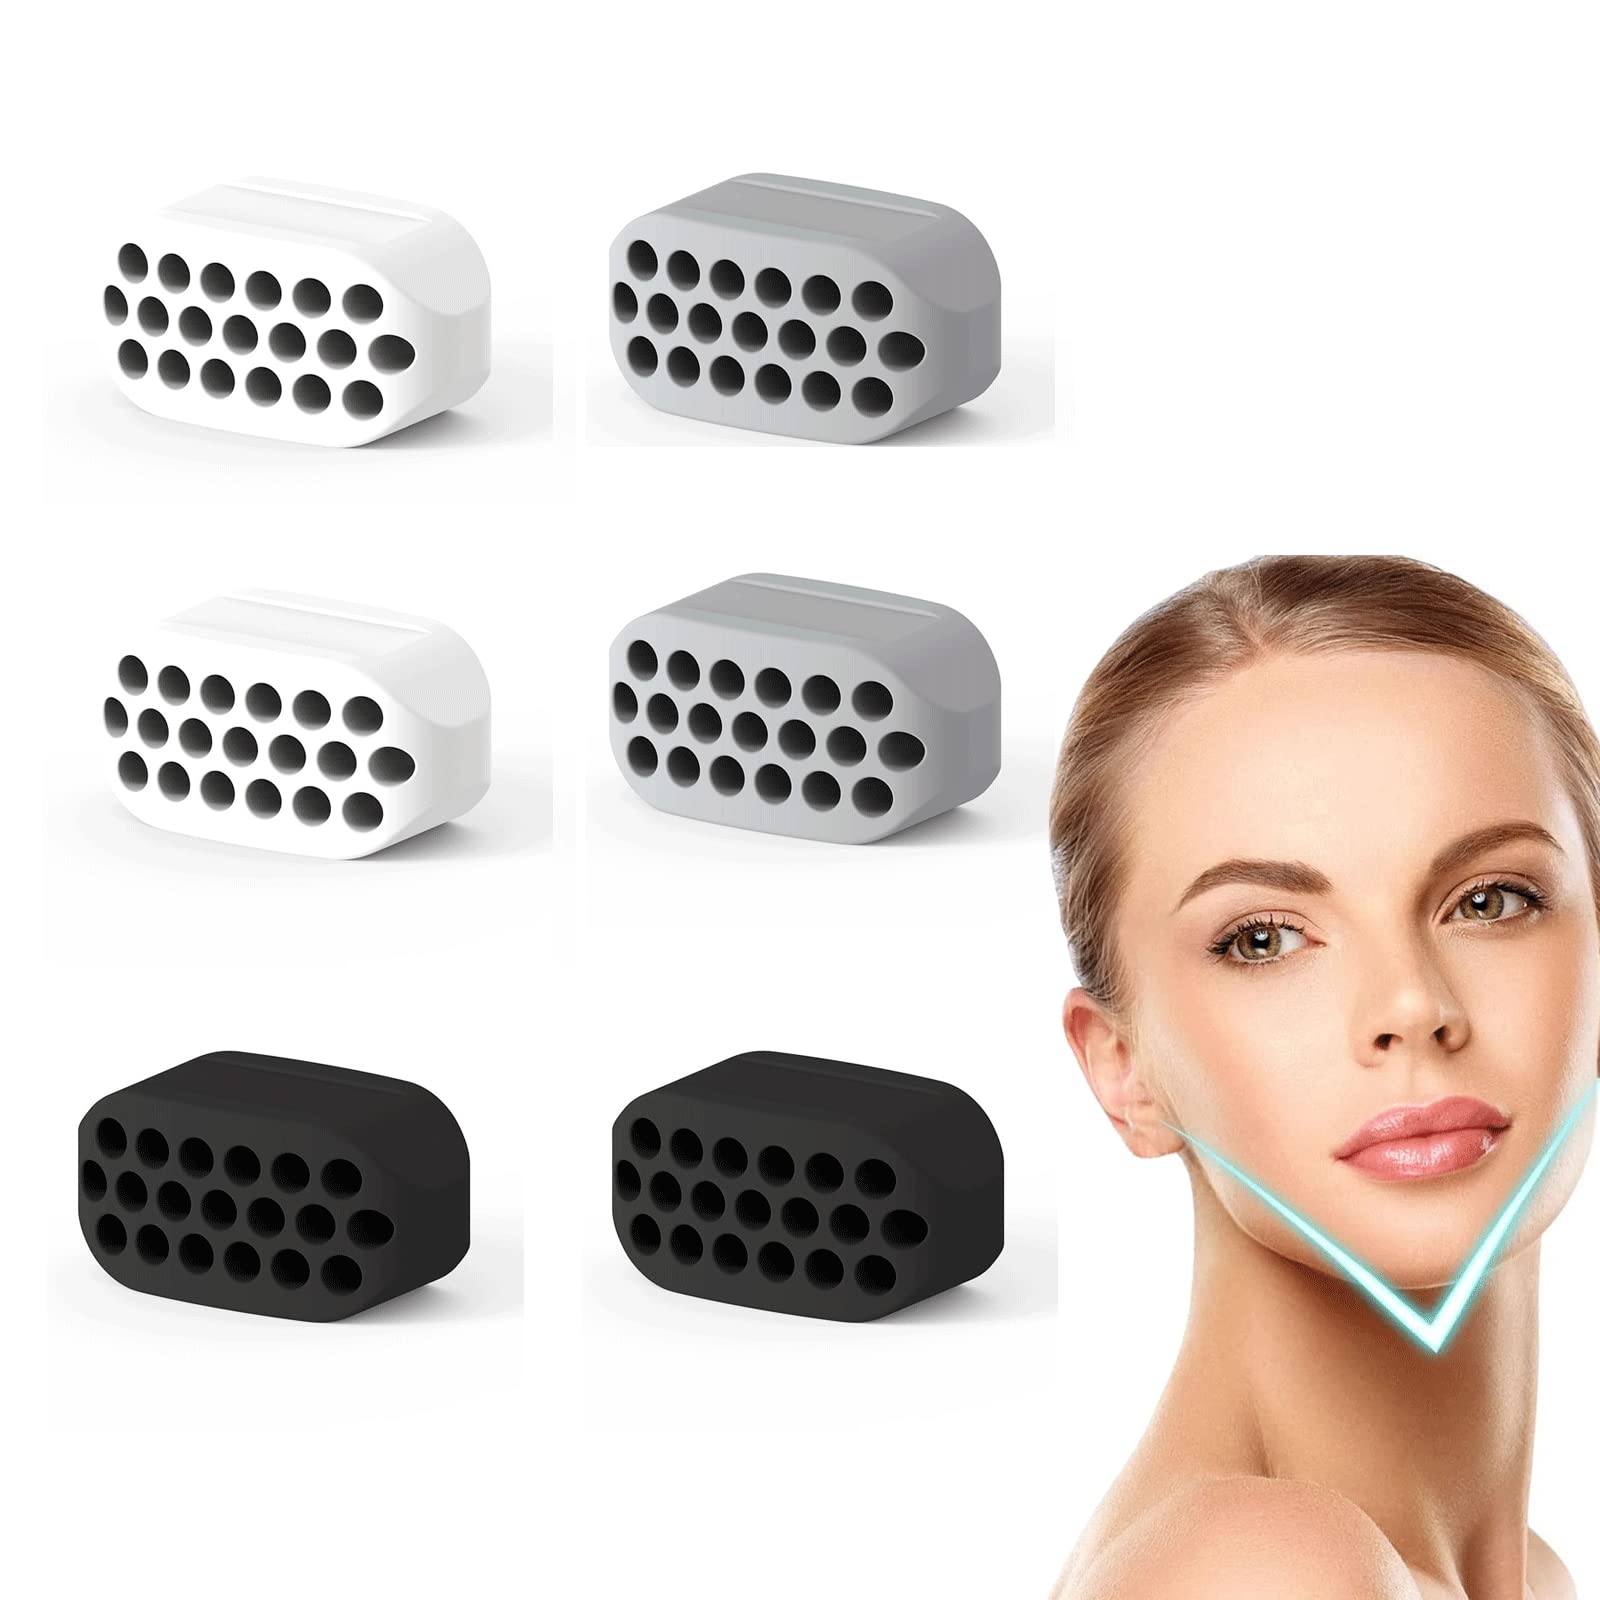 6PCS Jaw Exerciser Jawline Ball Face Neck Fitness Exercise Trainer Mouth  Toning